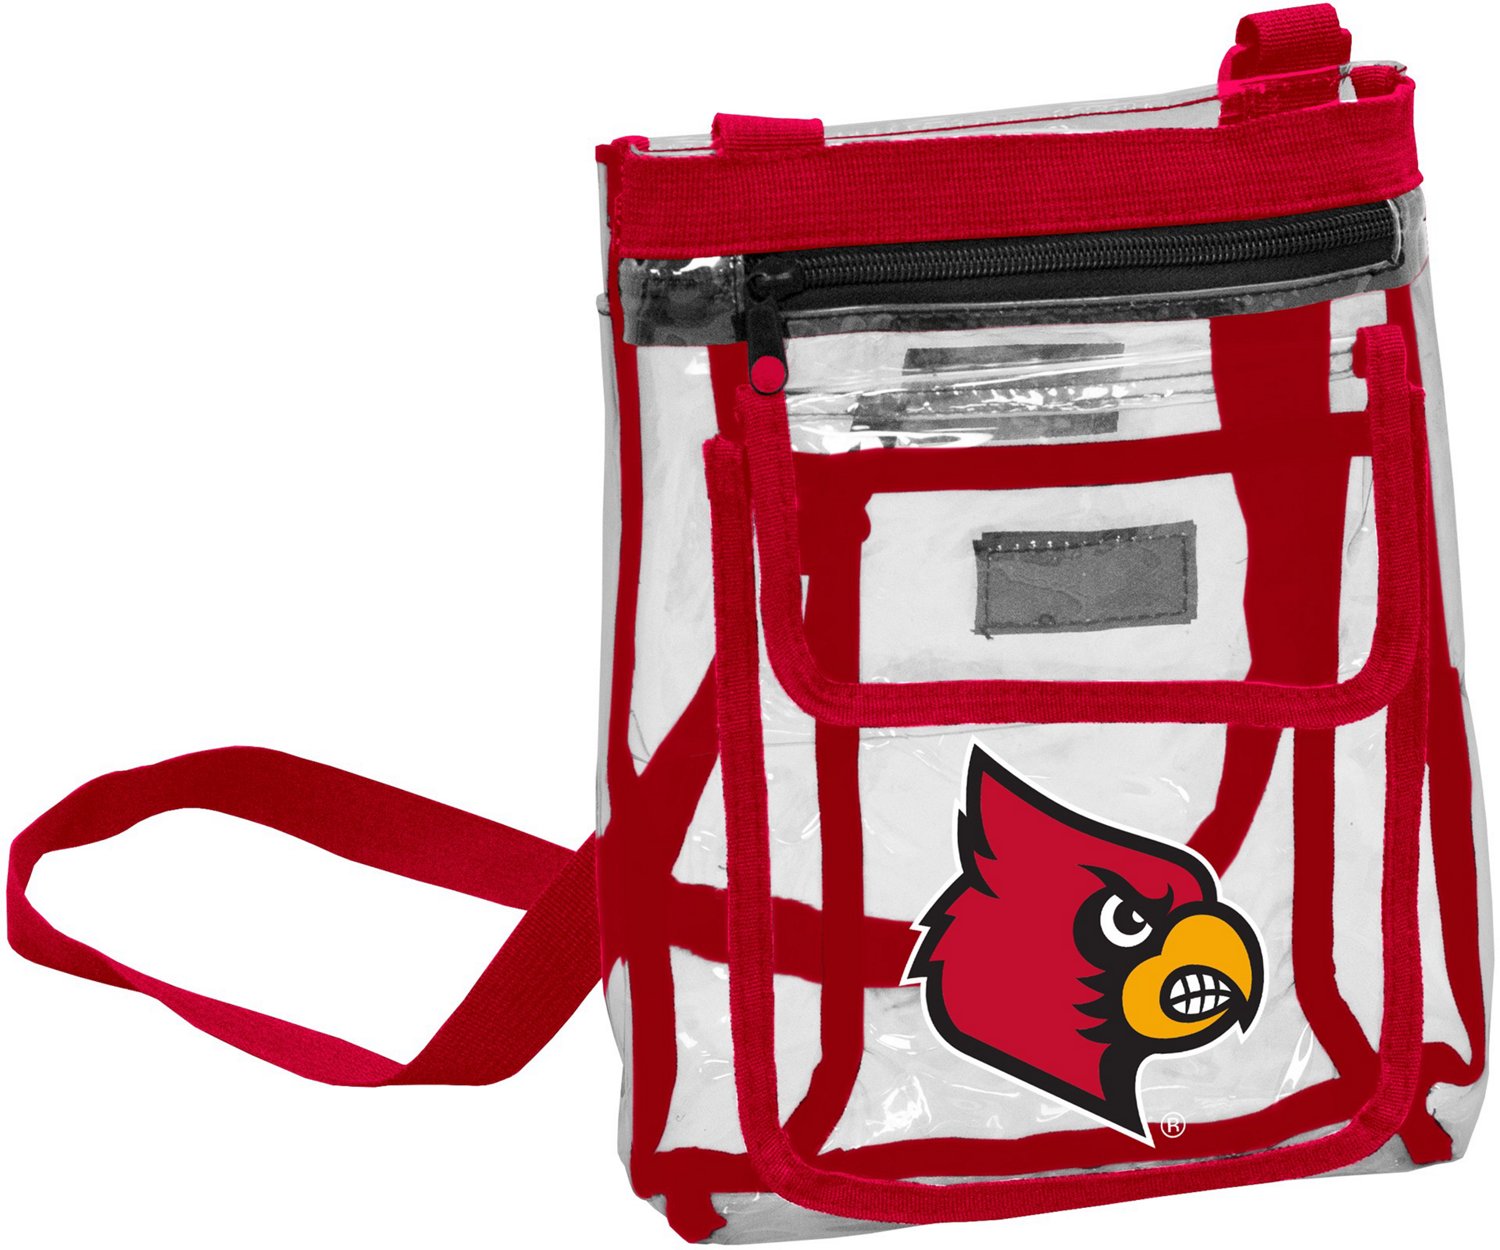 University of Louisville Cardinals Duffel Bag Gym Bag With Pockets